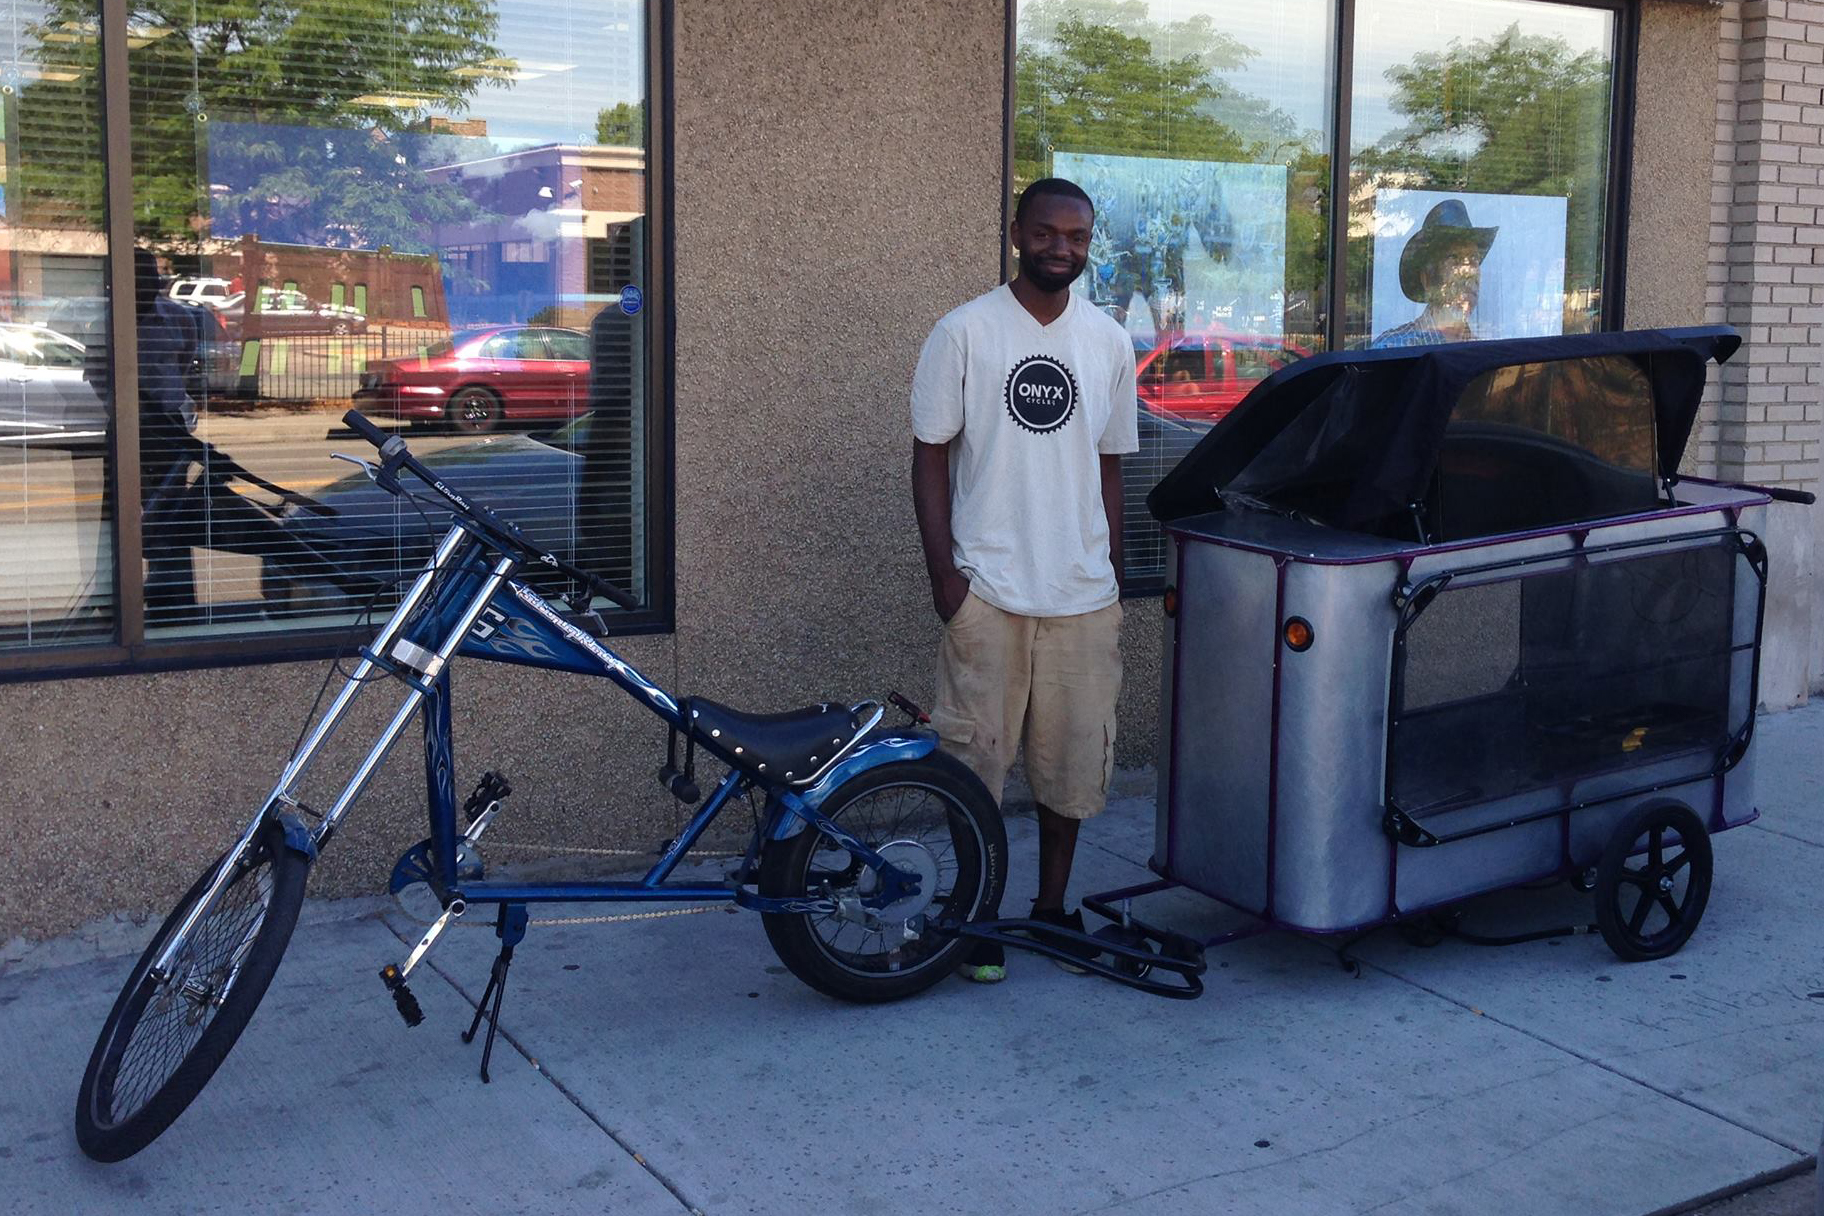 A man stands in front of a bicycle pulling a trailer